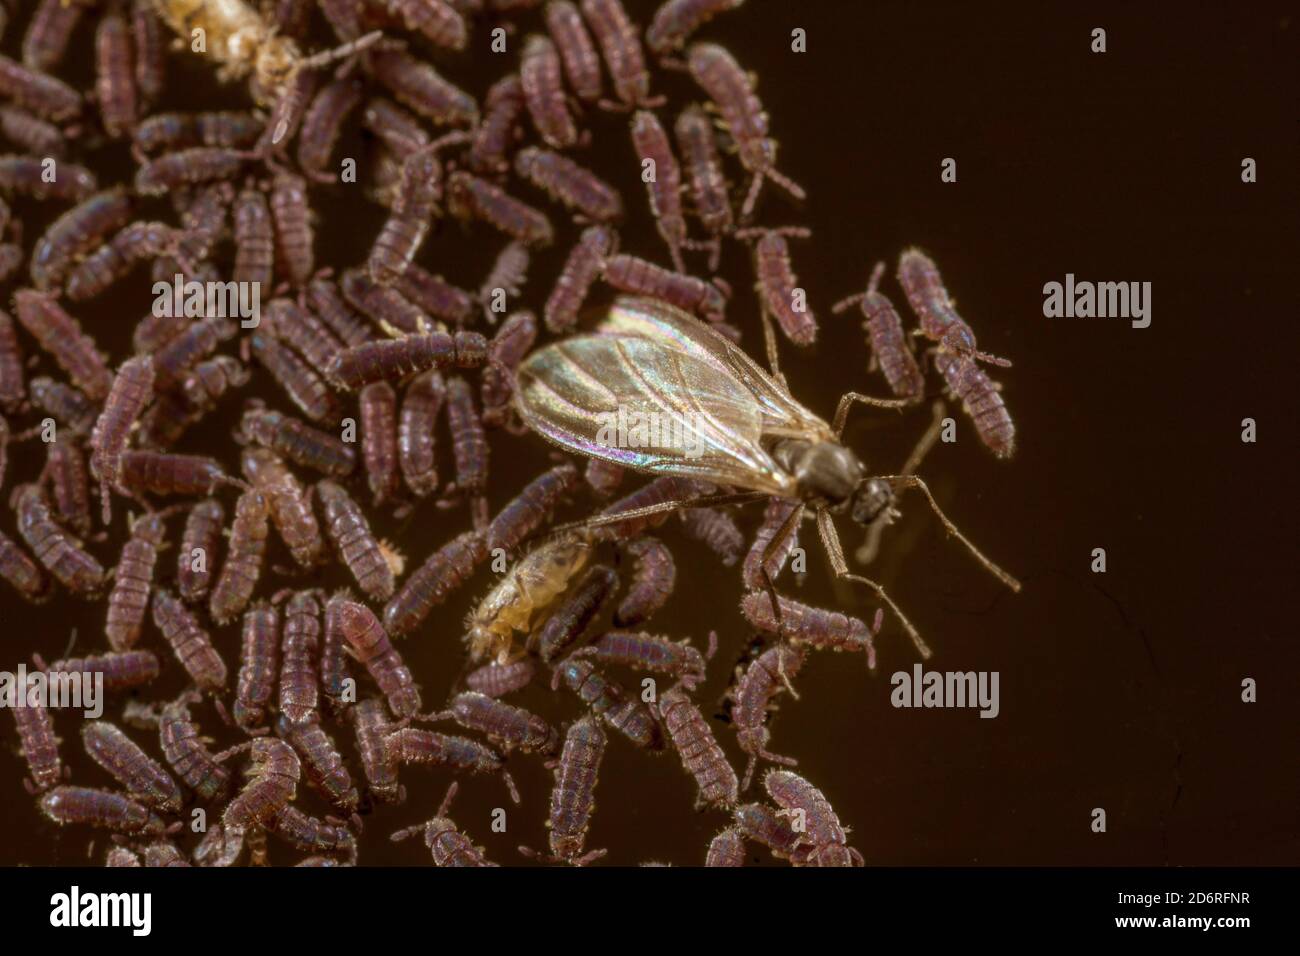 common black freshwater springtail (Podura aquatica), macro shot of an aggregation of black freshwater springtails with fly, Germany Stock Photo